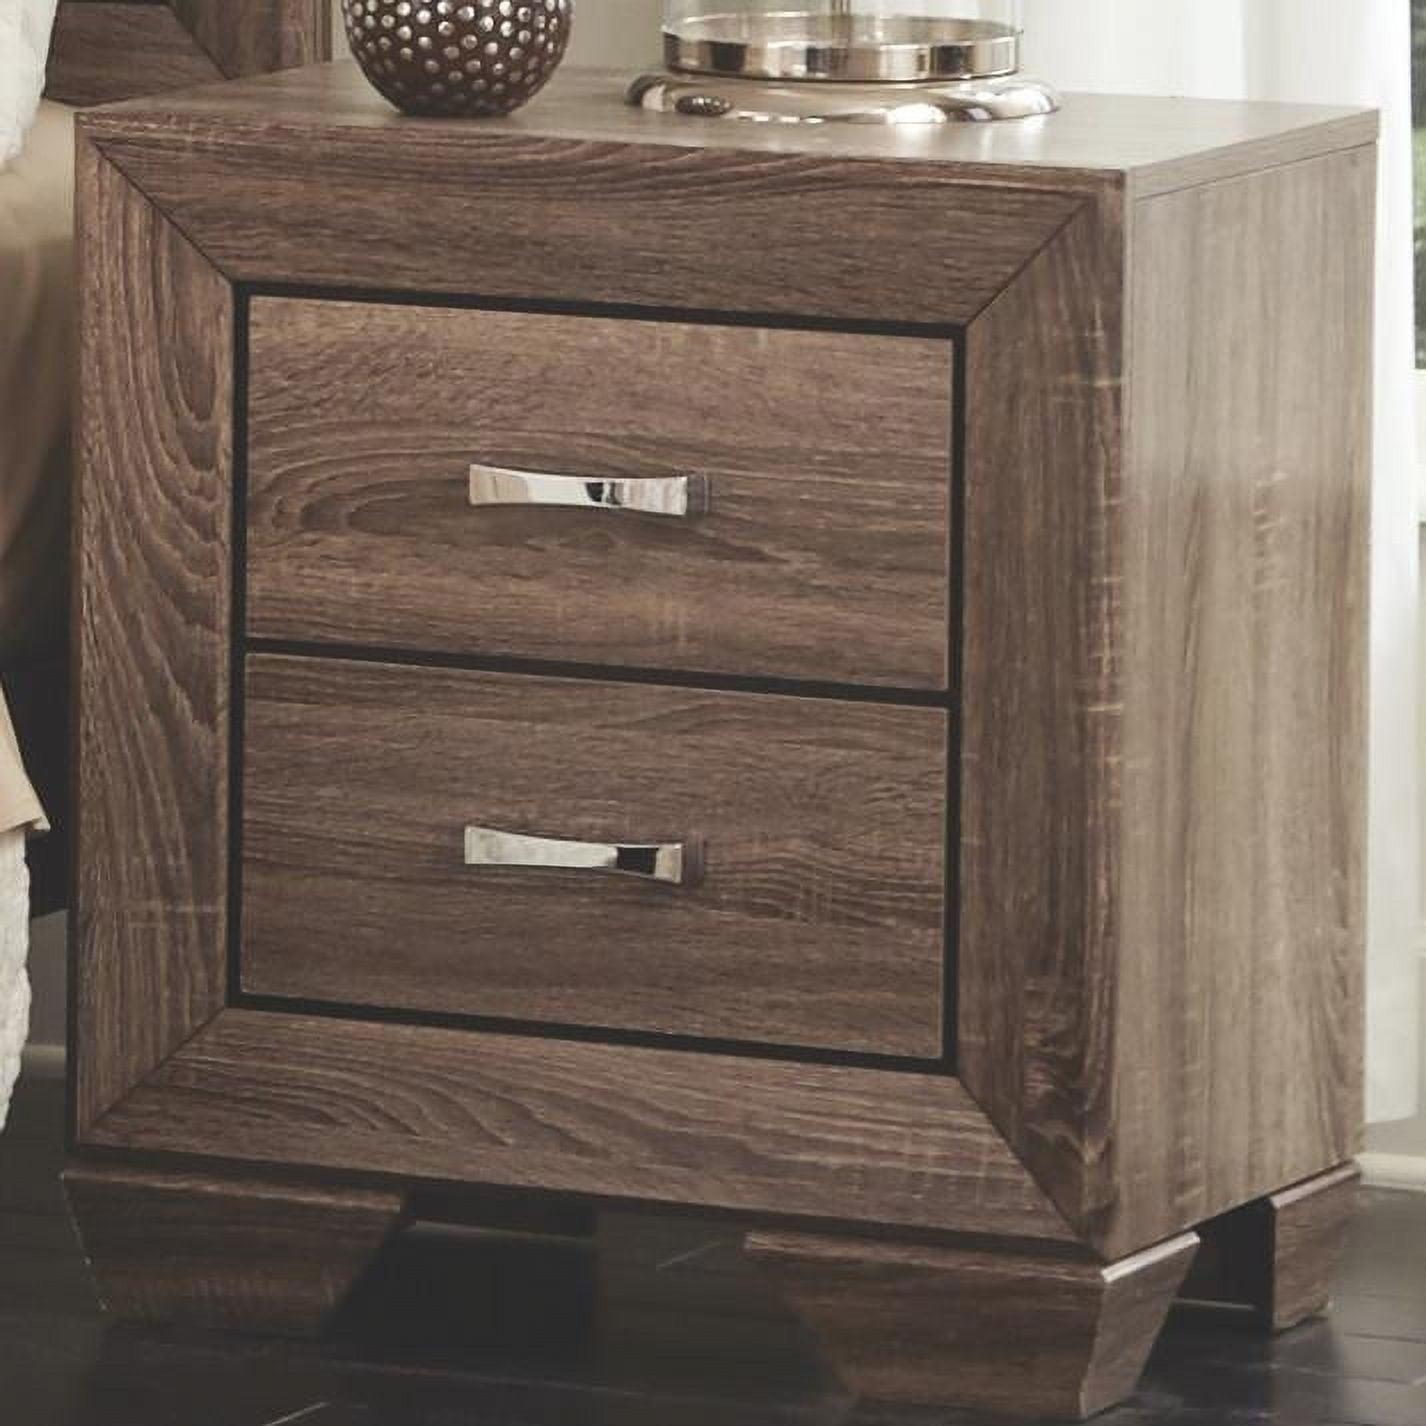 Transitional 2-Drawer Nightstand in Washed Taupe with Natural Oak Grain